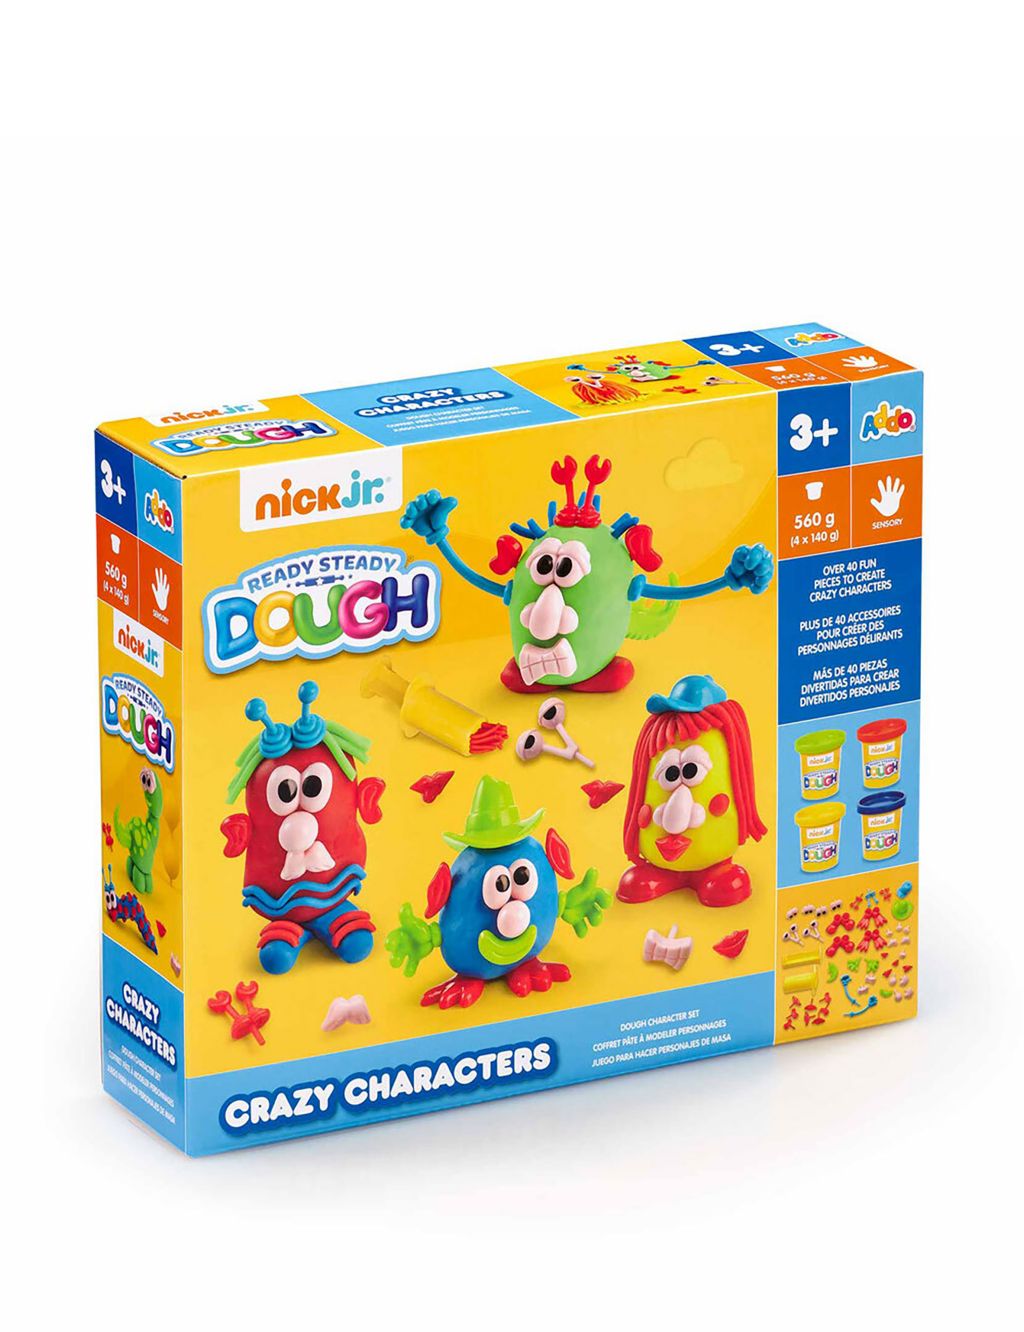 Nick Jr. Ready Steady Dough Crazy Characters Playset (3+ Yrs) image 1